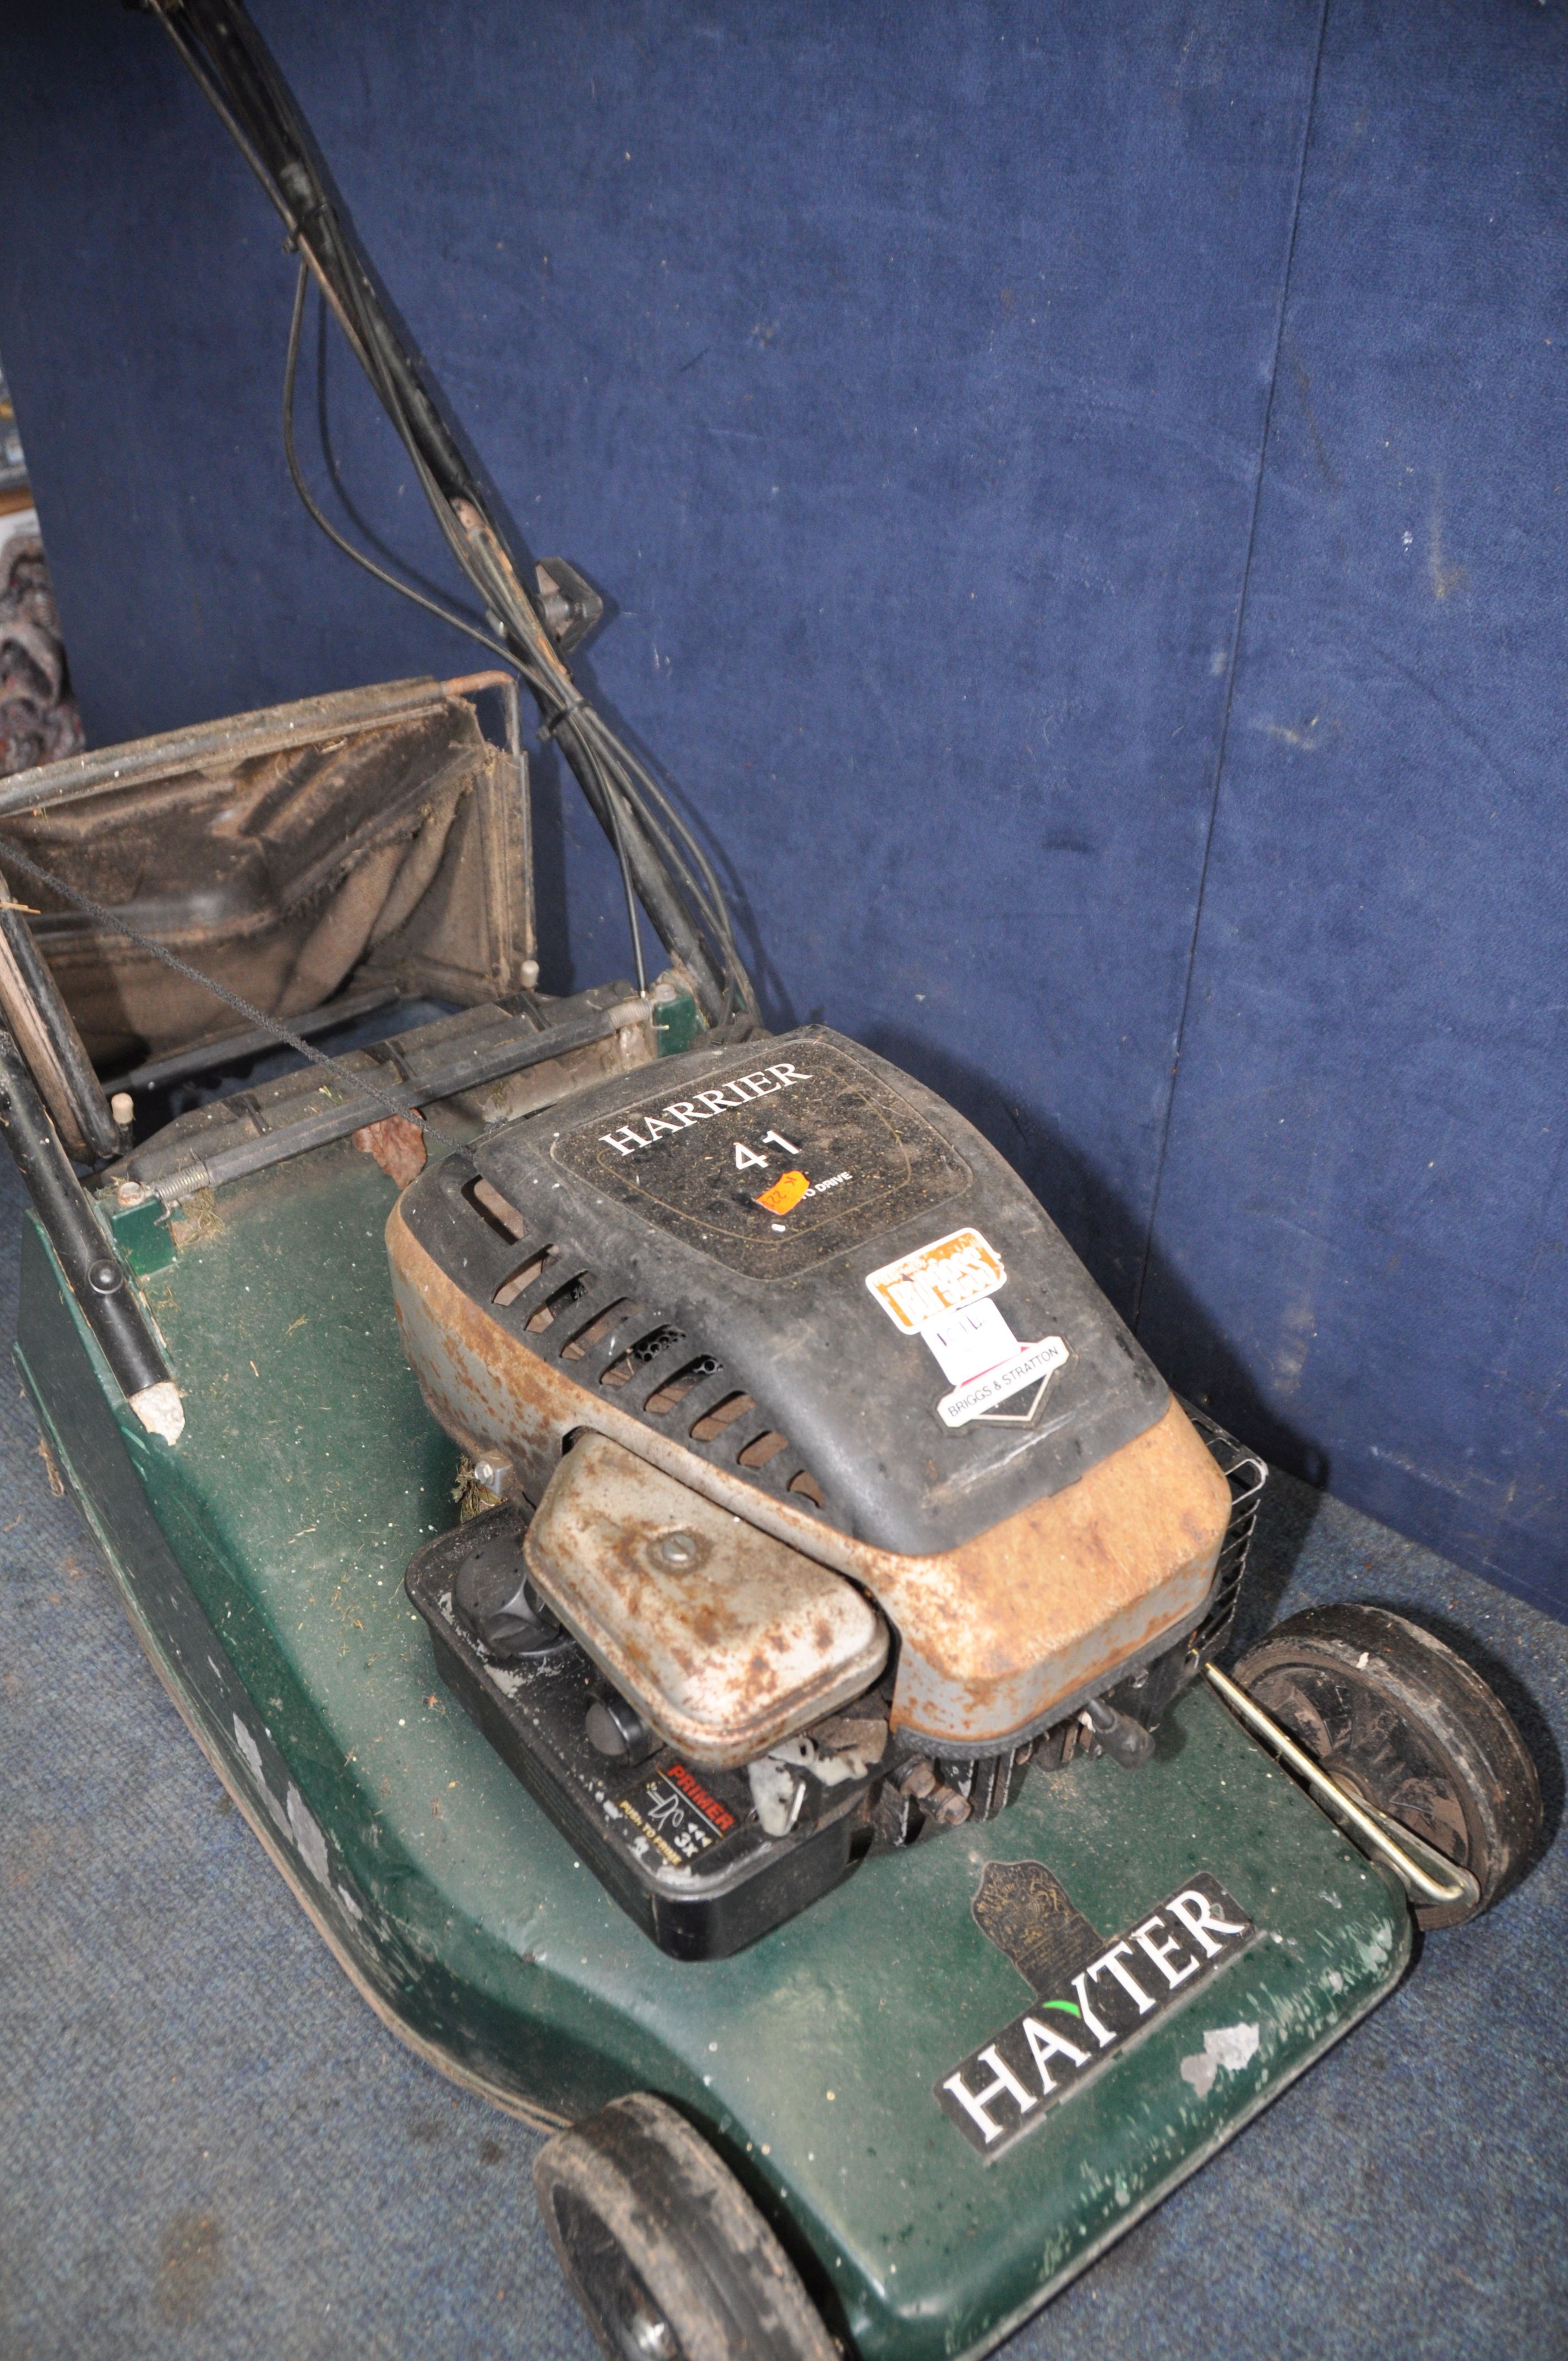 A HAYTER HARRIER 41 PETROL LAWN MOWER with grass box (UNTESTED but engine pulling freely) - Image 2 of 2